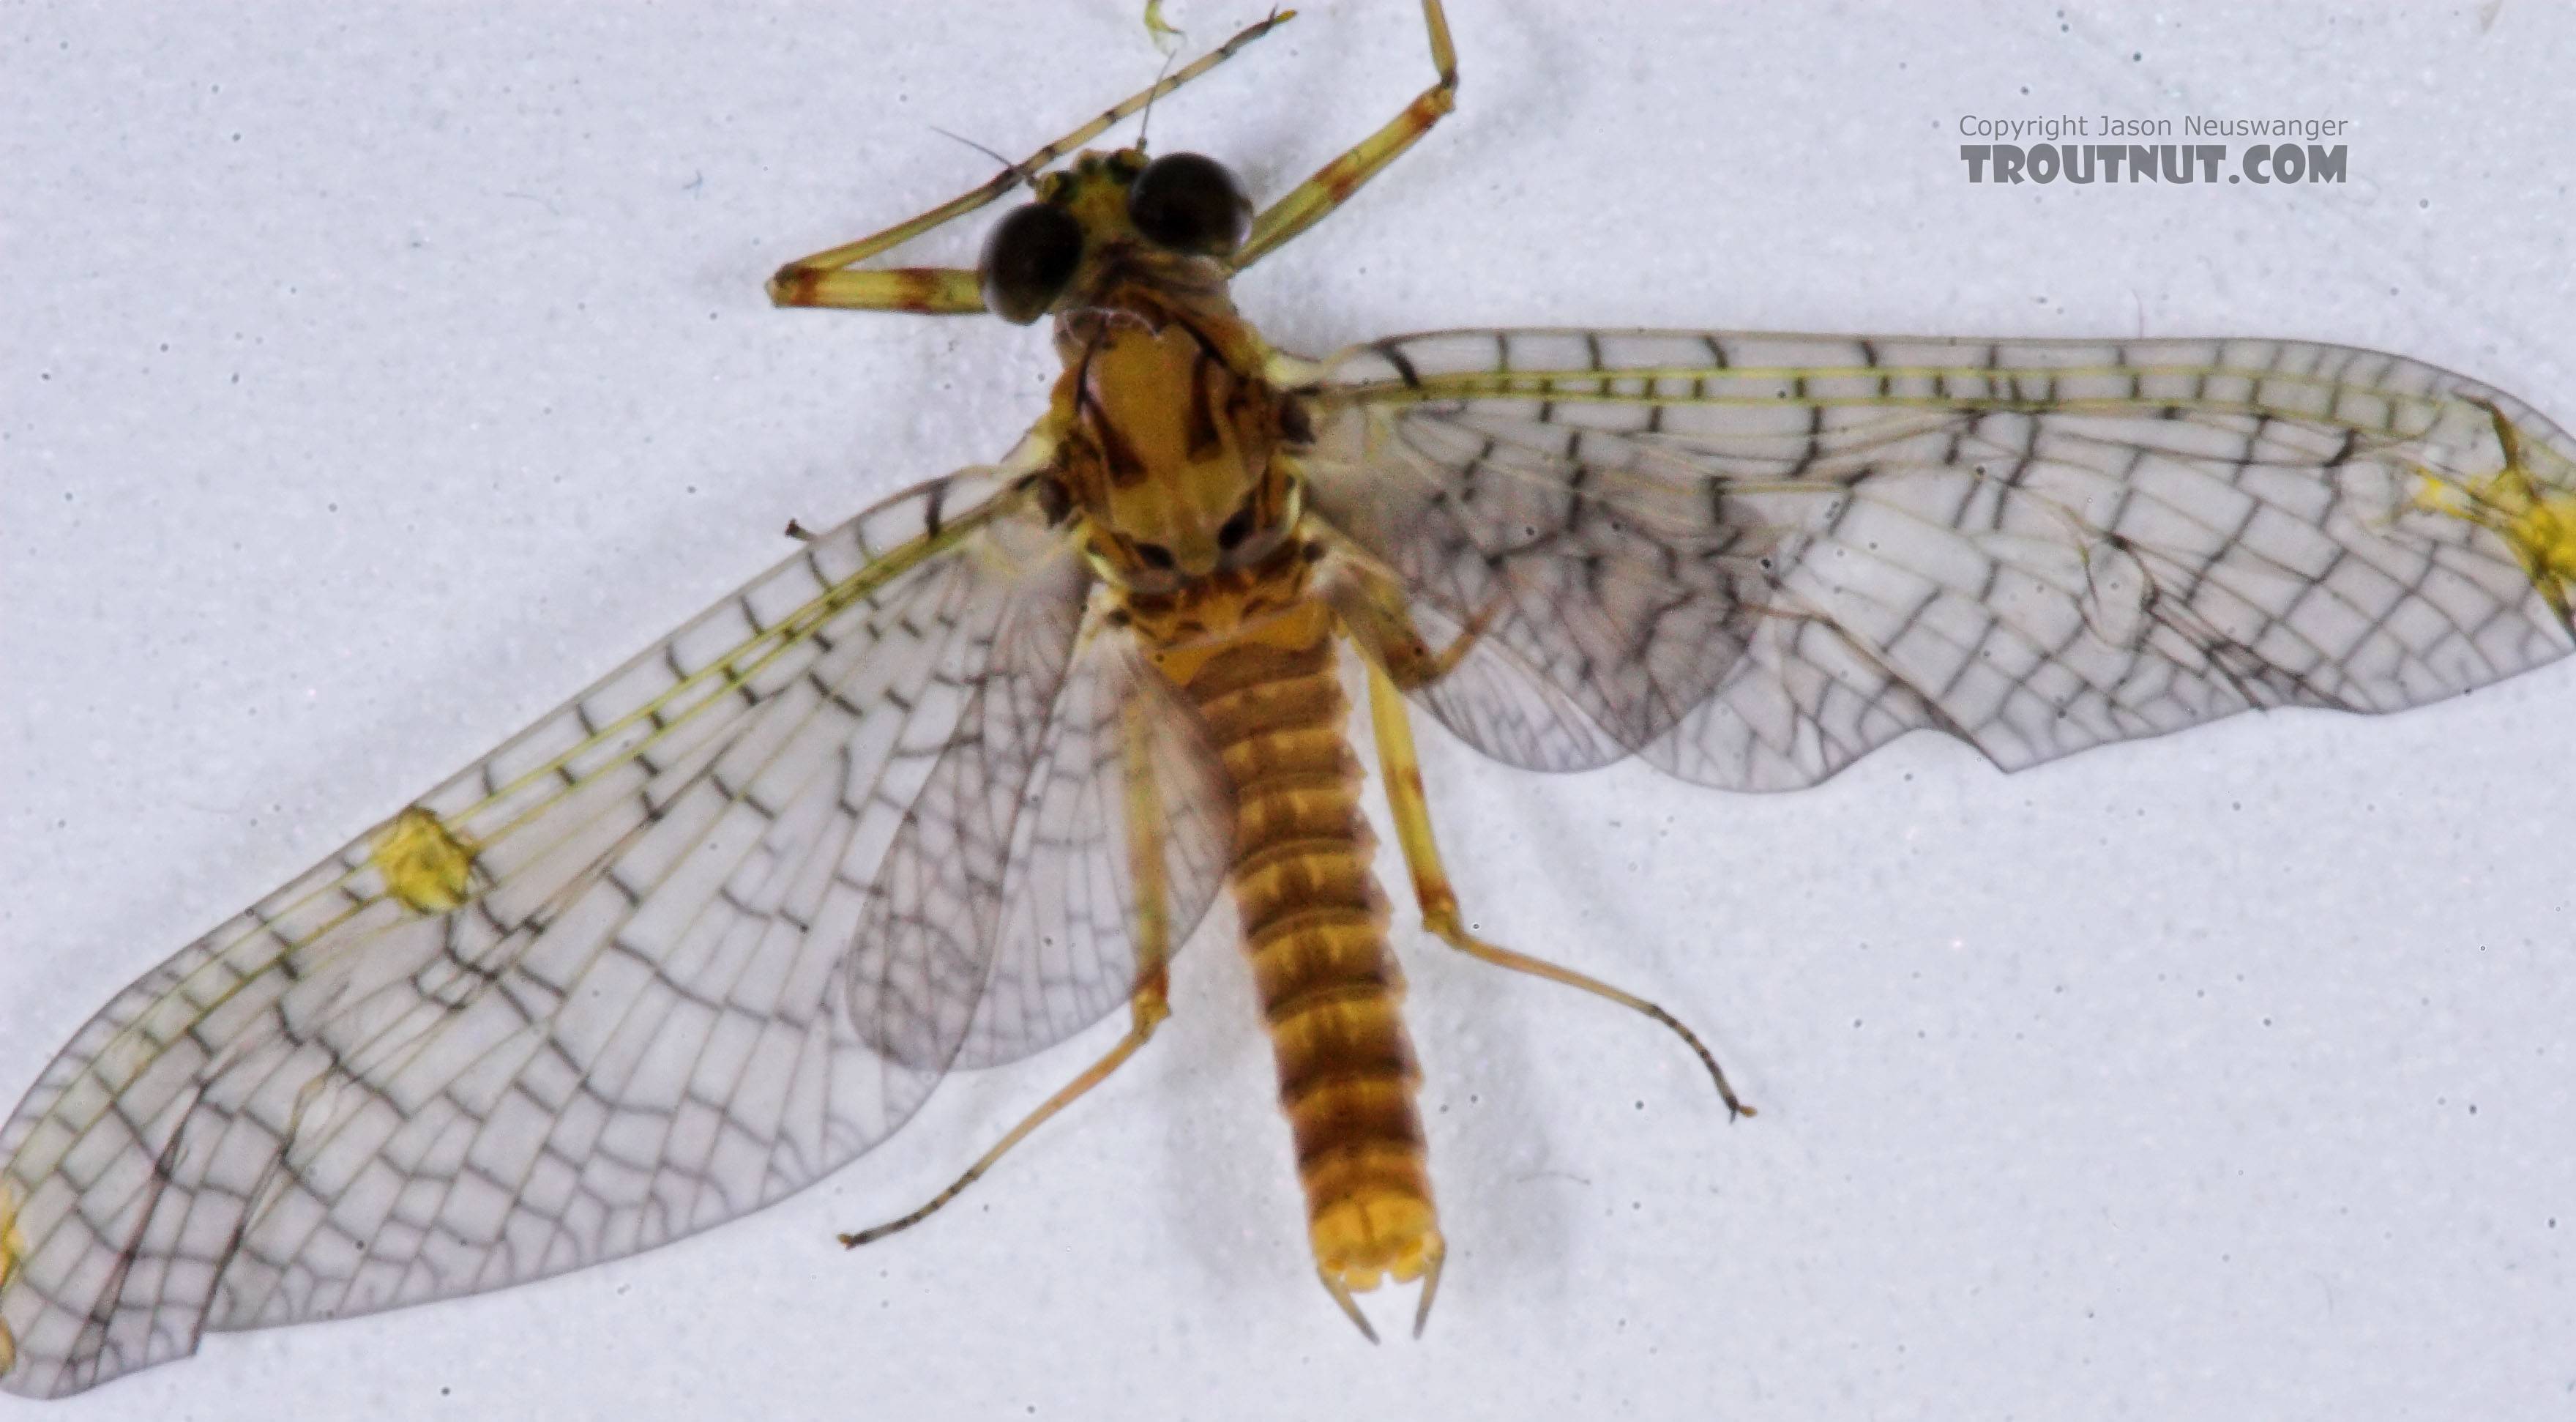 Female Maccaffertium (March Browns and Cahills) Mayfly Dun from the Namekagon River in Wisconsin